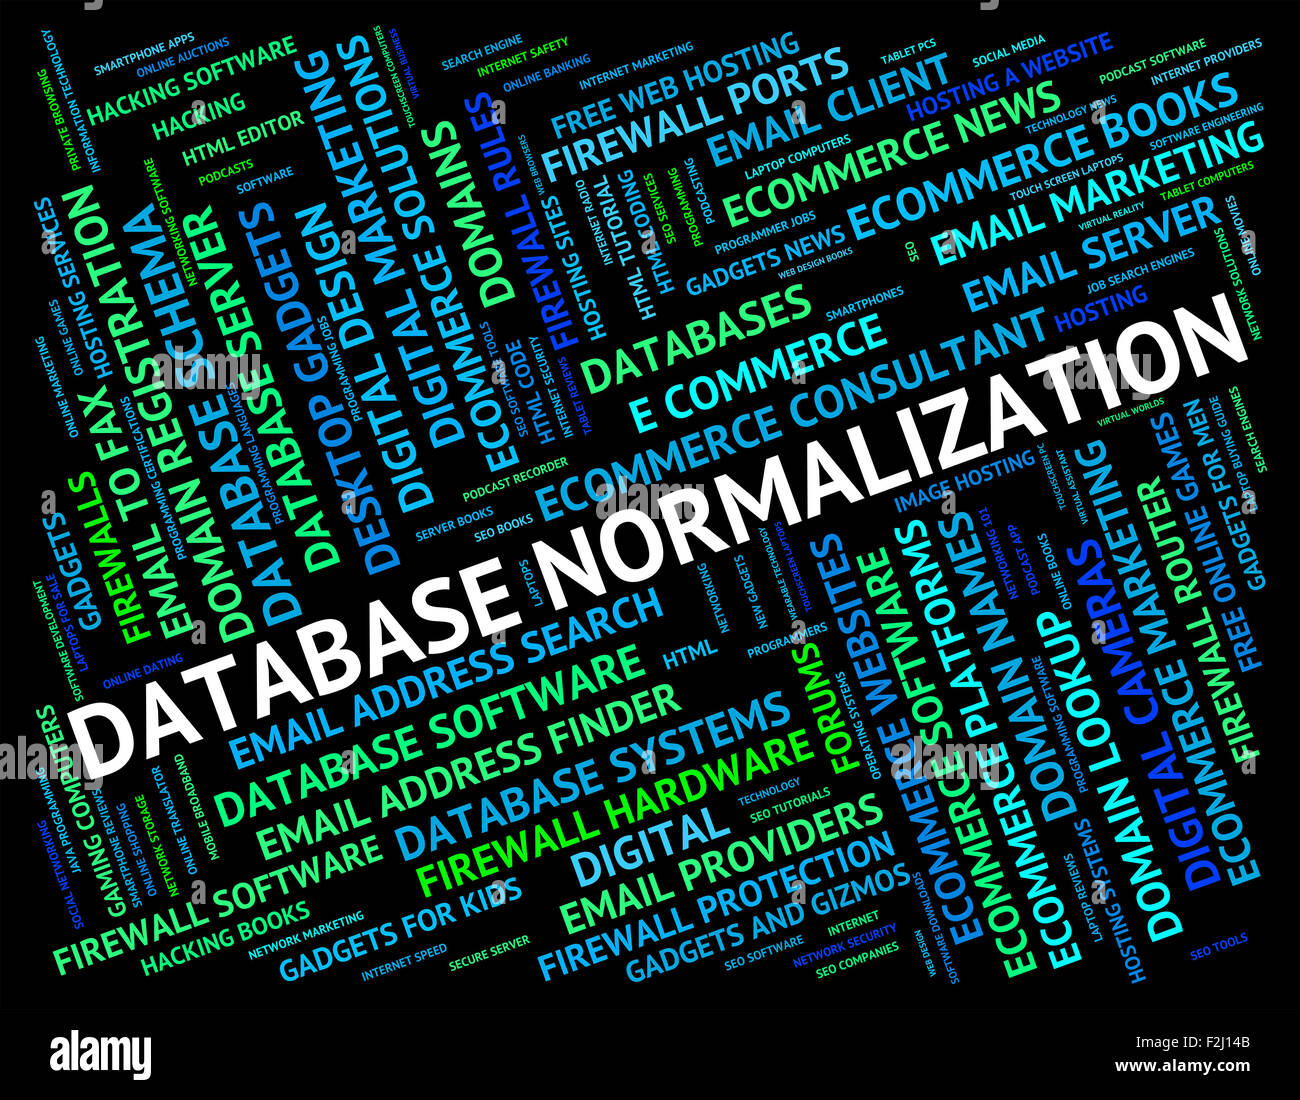 Database Normalization Meaning Computing Standard And Text Stock Photo